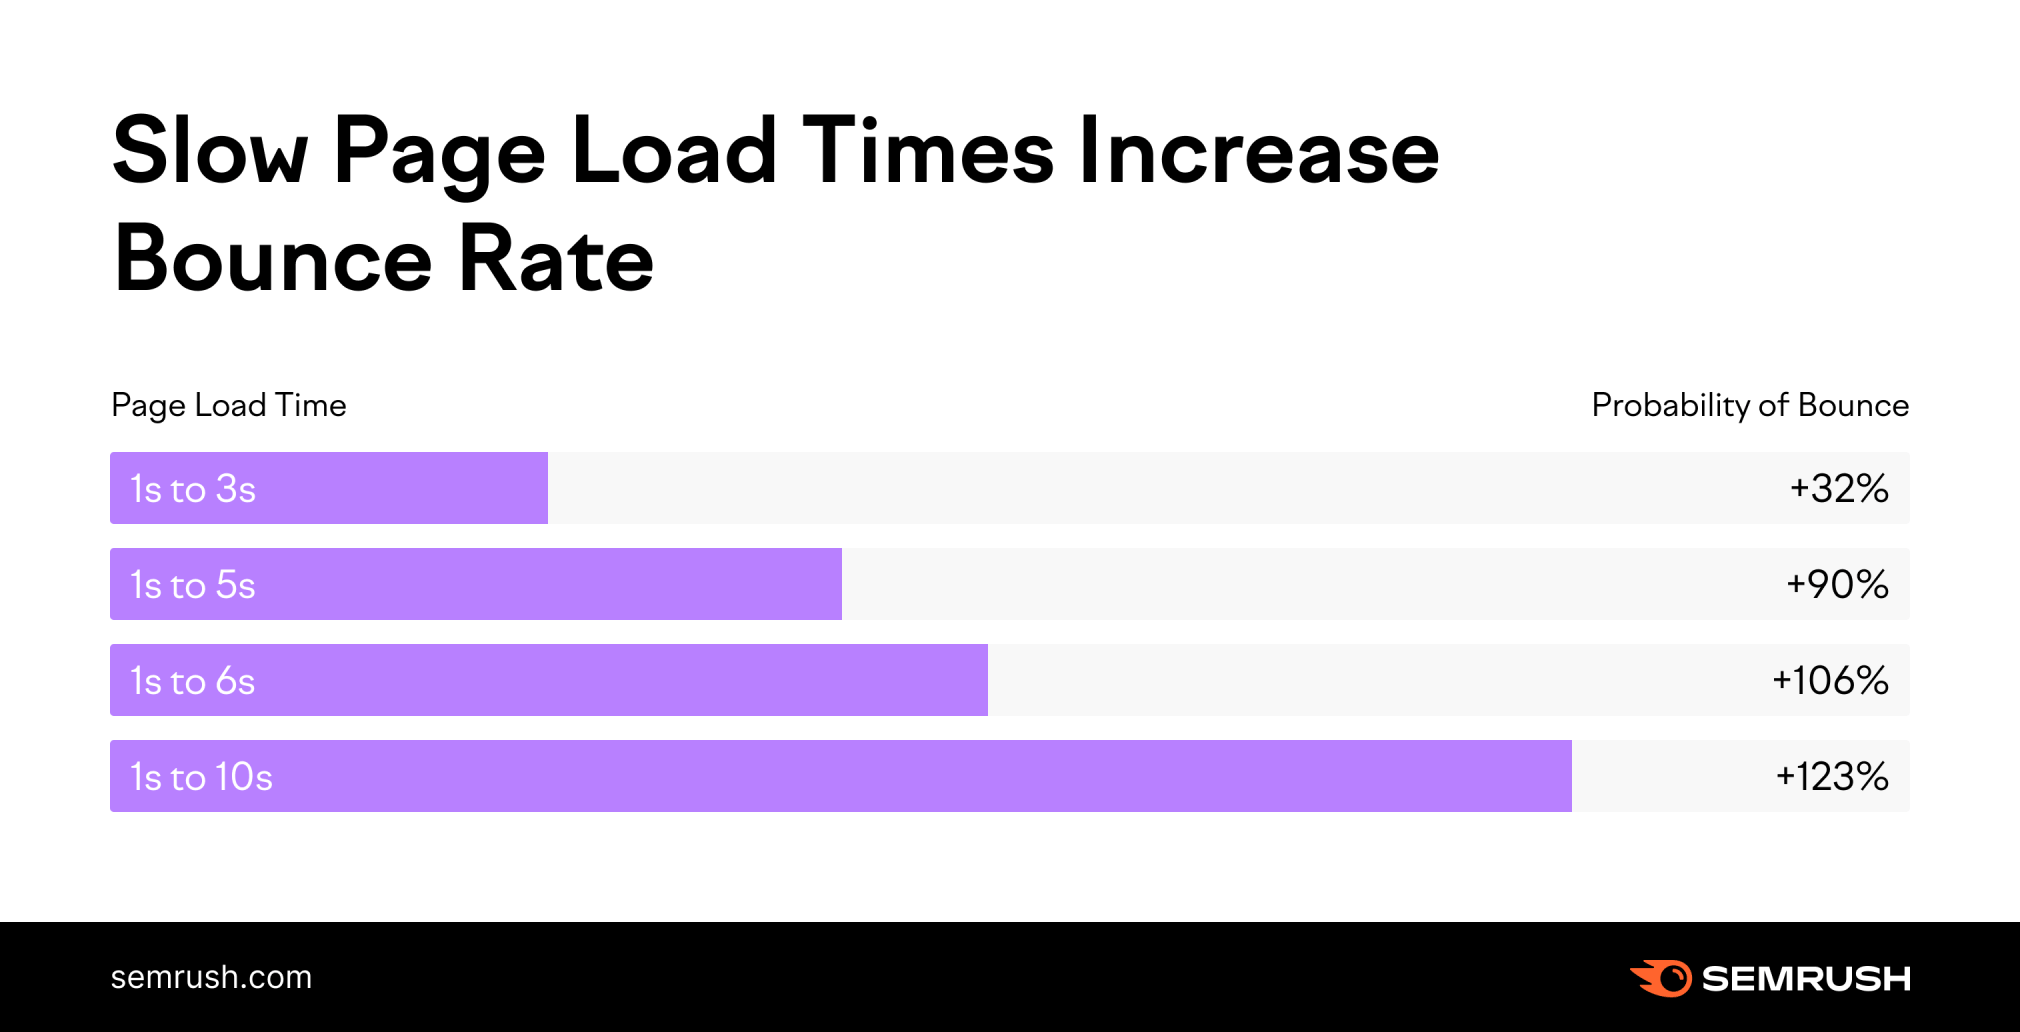 Chart that shows that pages with longer page load times have higher bounce rates